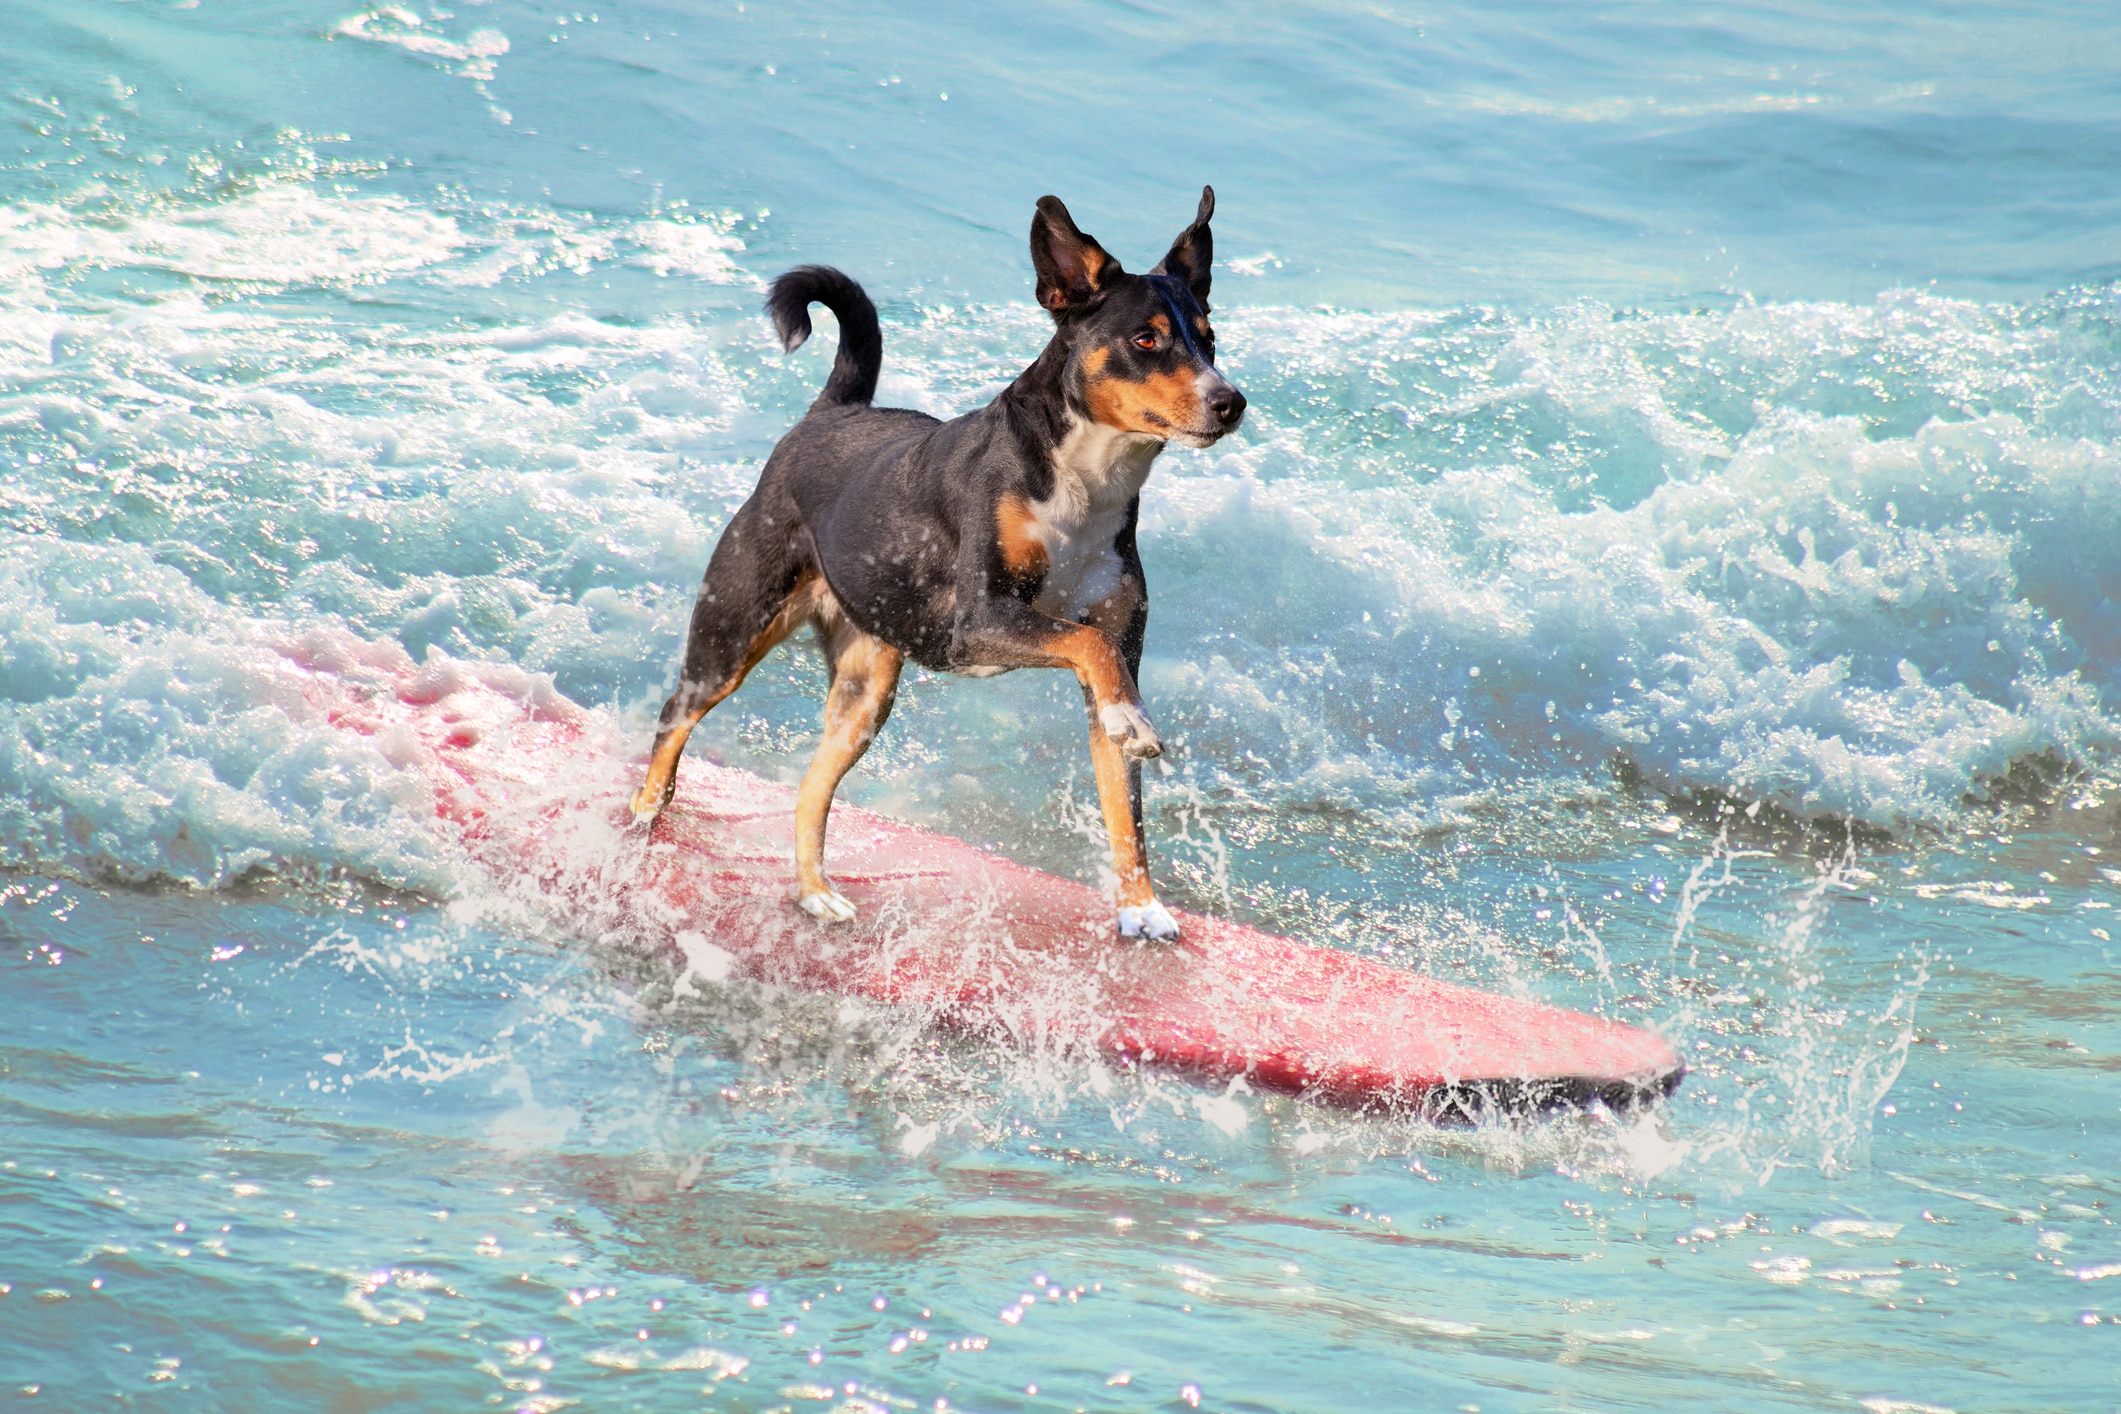 A mixed breed puppy surfs on a board.